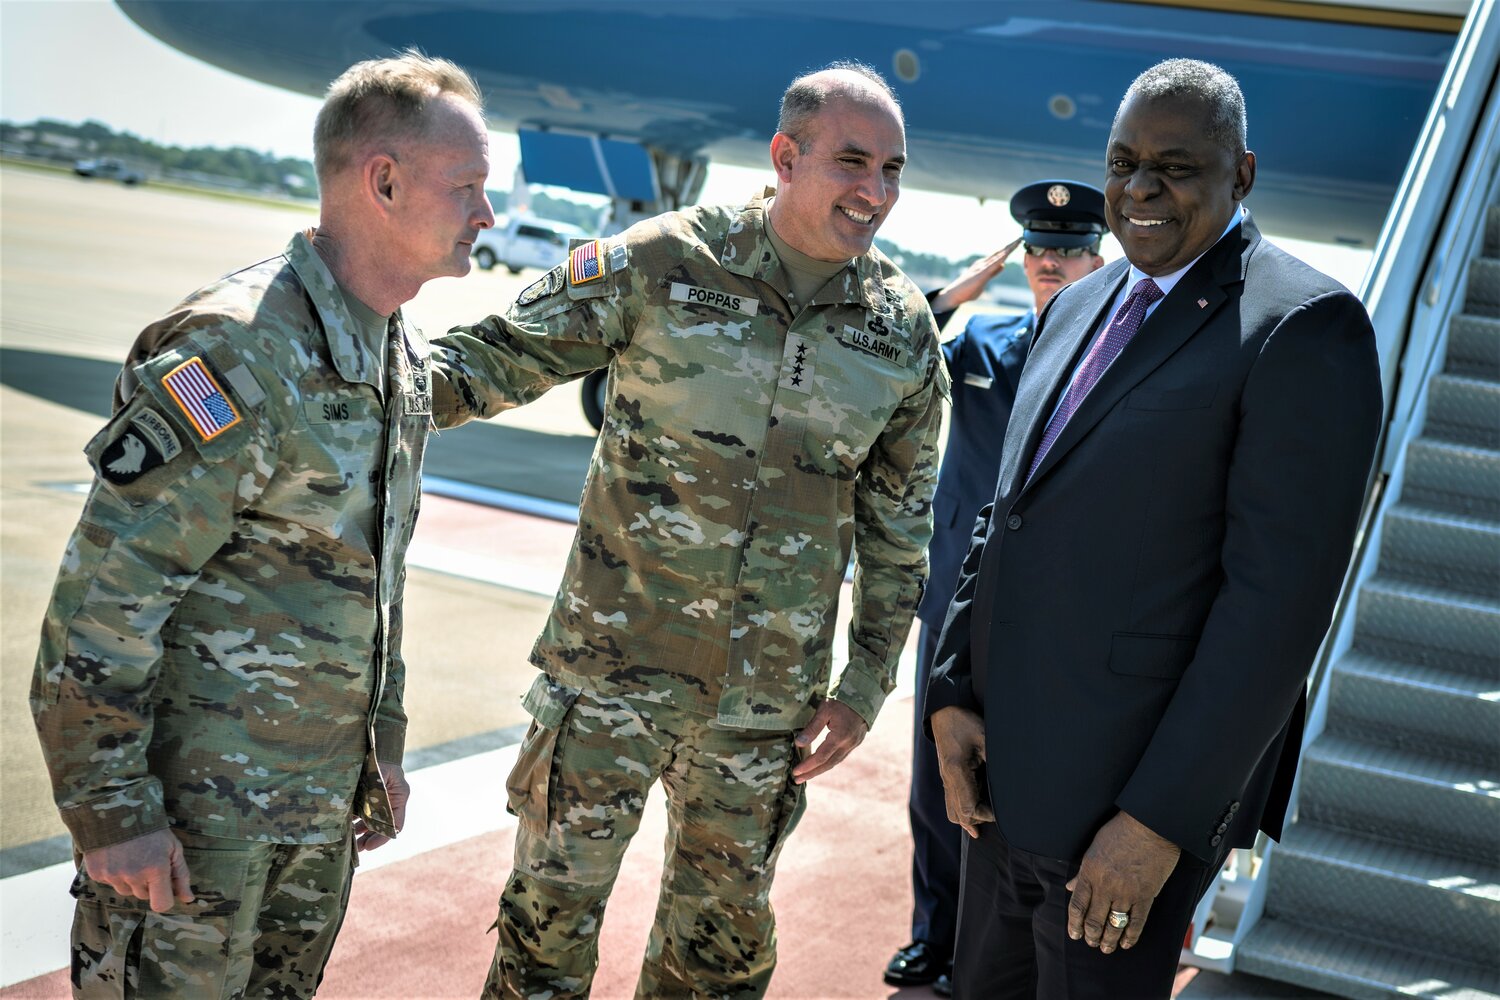 Secretary of Defense Lloyd J. Austin III is greeted by U.S. Army Forces Command commanding general Gen. Drew Poppas and Command Sgt. Maj. Todd Sims after arriving at Pope Army Airfield on Friday. Austin visited Fort Bragg and Fayetteville State University to highlight the department’s focus on the national service.